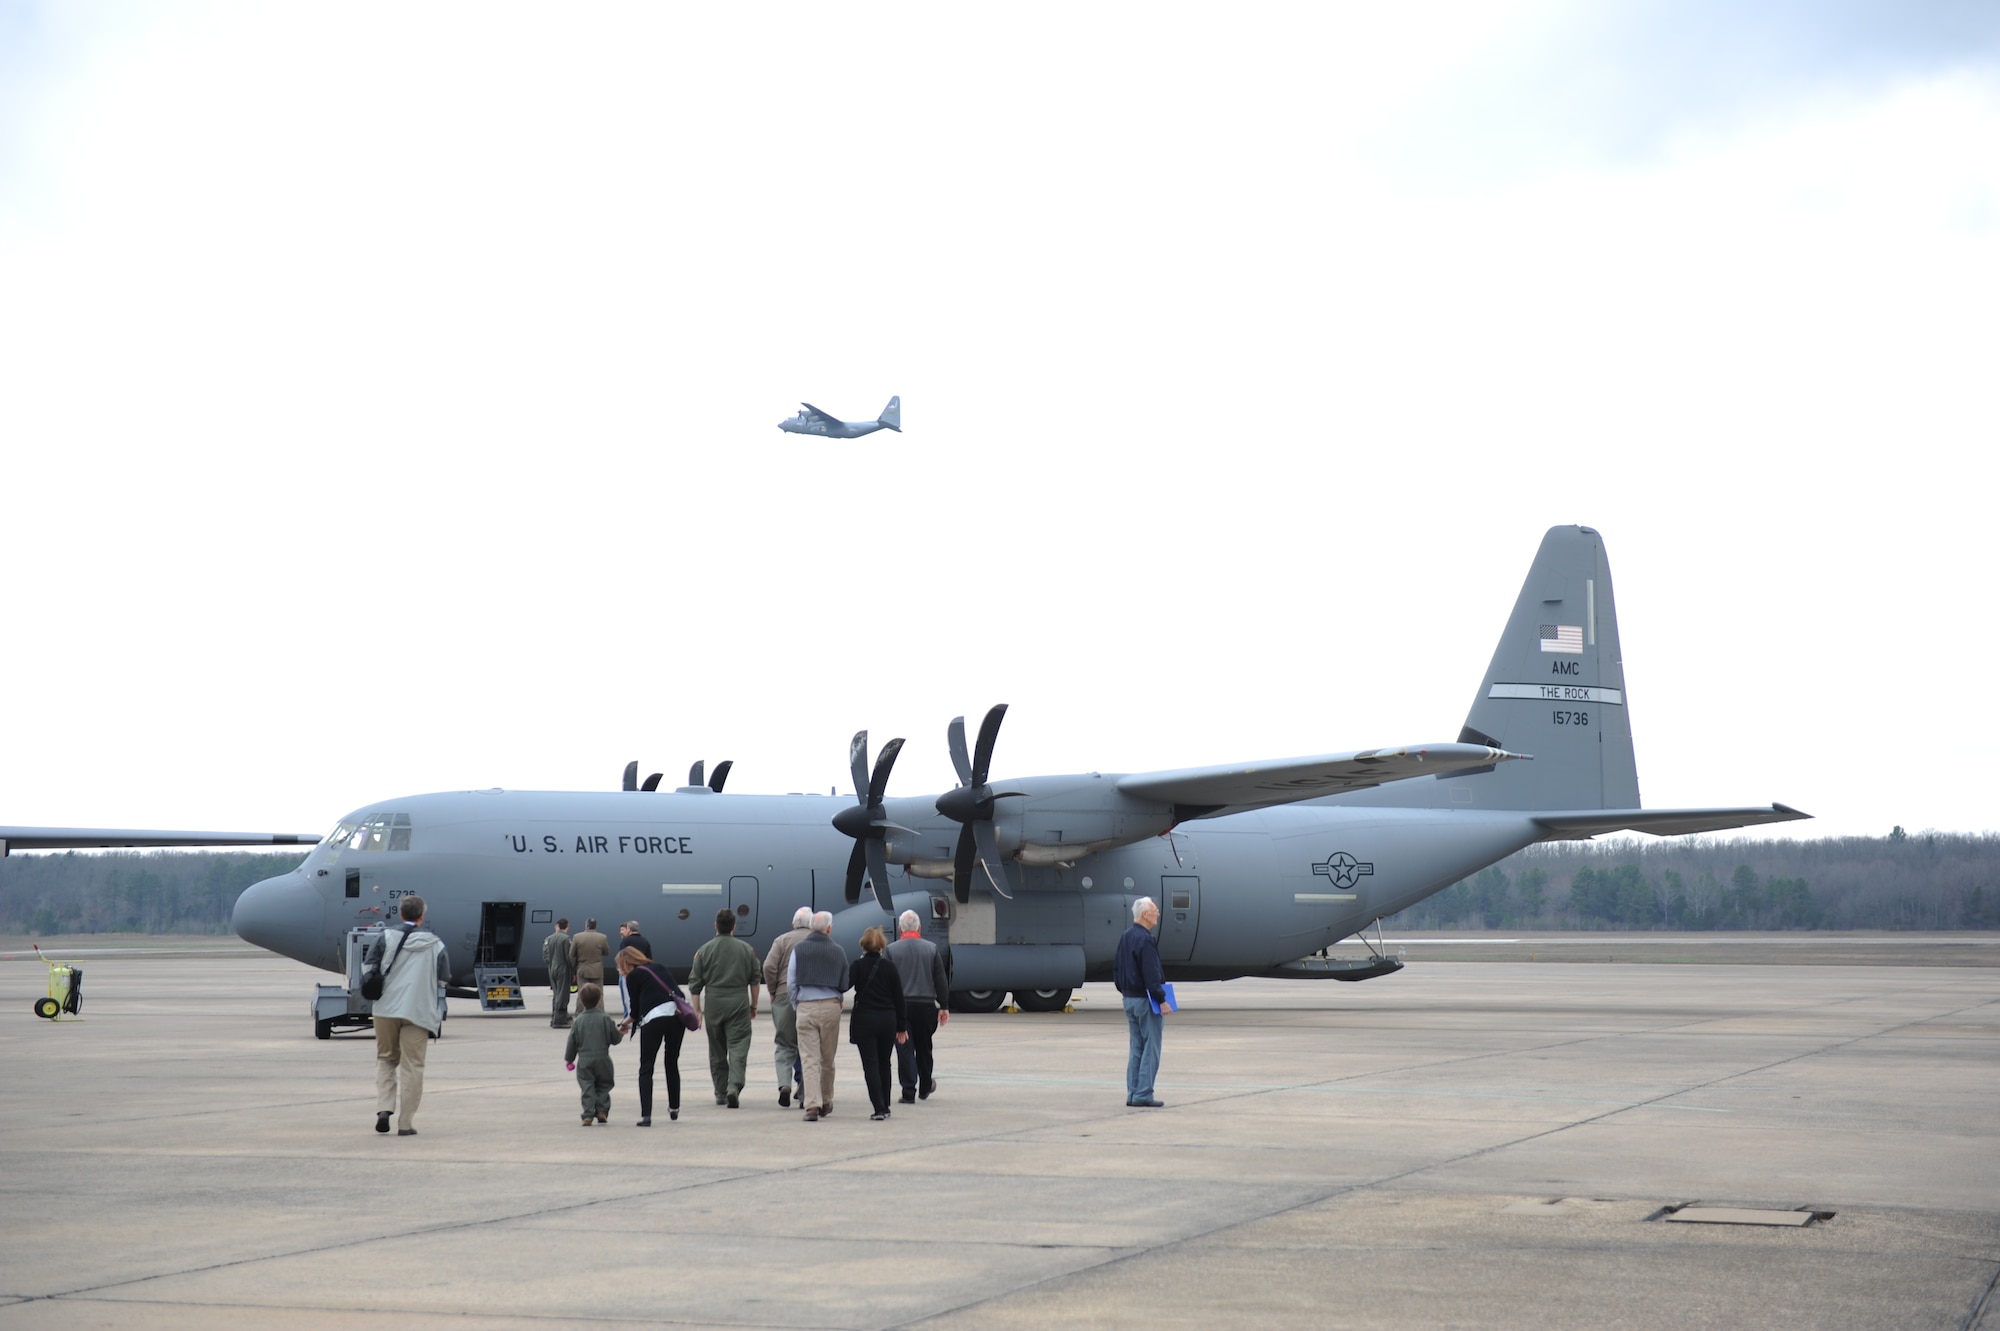 Visitors to the 41st Airlift Squadron receive a tour of a C-130J Super Hercules during a reunion March 24, 2017, on Little Rock Air Force Base, Ark. The reunion honored the 75th anniversary of the 41st AS. (U.S. Air Force photo by Airman 1st Class Grace Nichols)